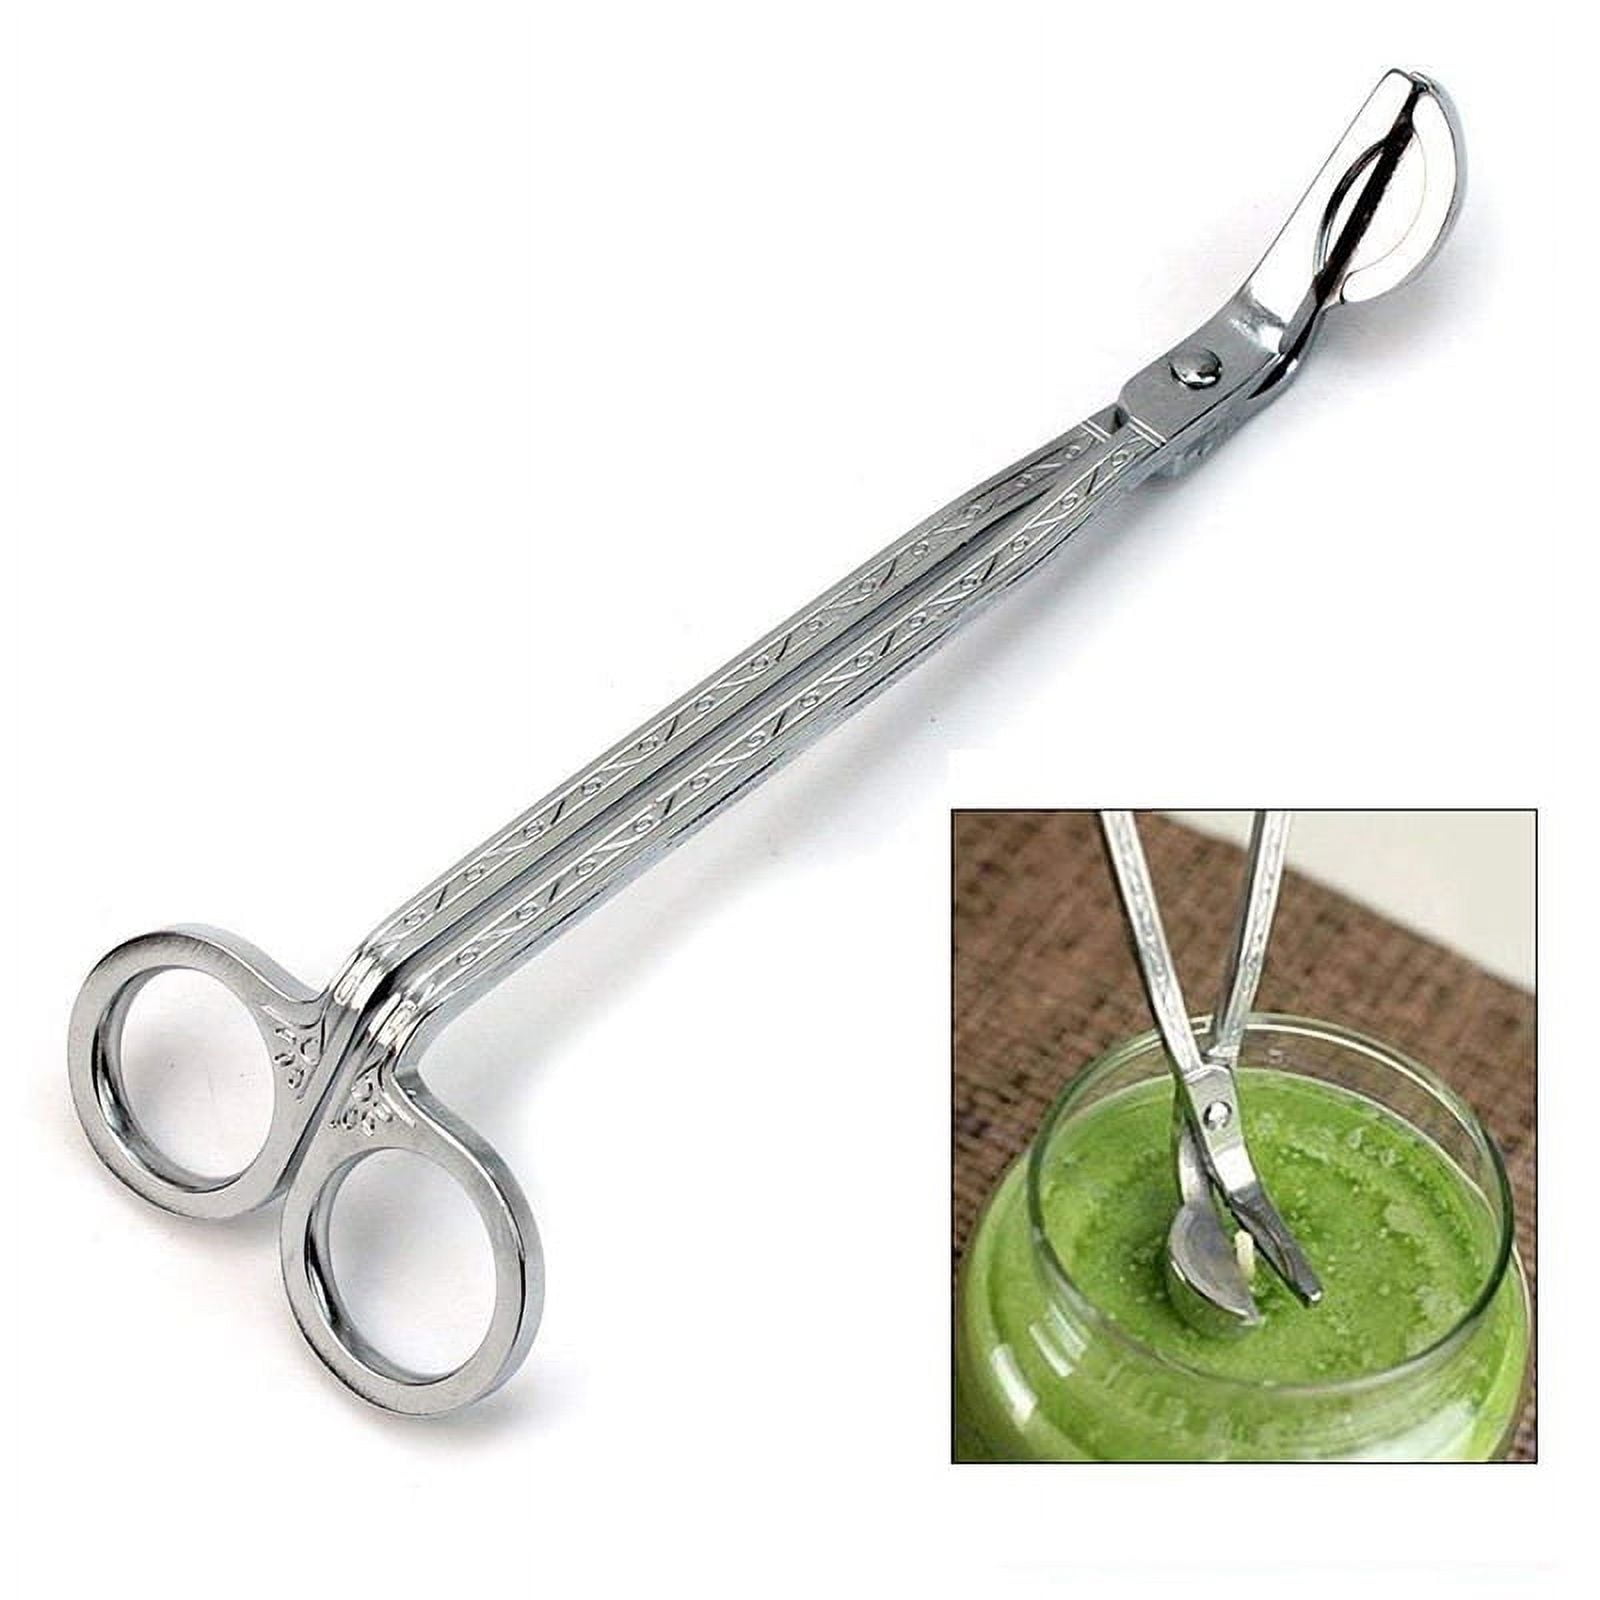 CHEFBEE Candle Wick Trimmer, Polished Stainless Steel Wick Clipper Cutter,  Scissors, Reaches Deep Into Candles to Cut Spent Wicks, Allow Cleaner Burn